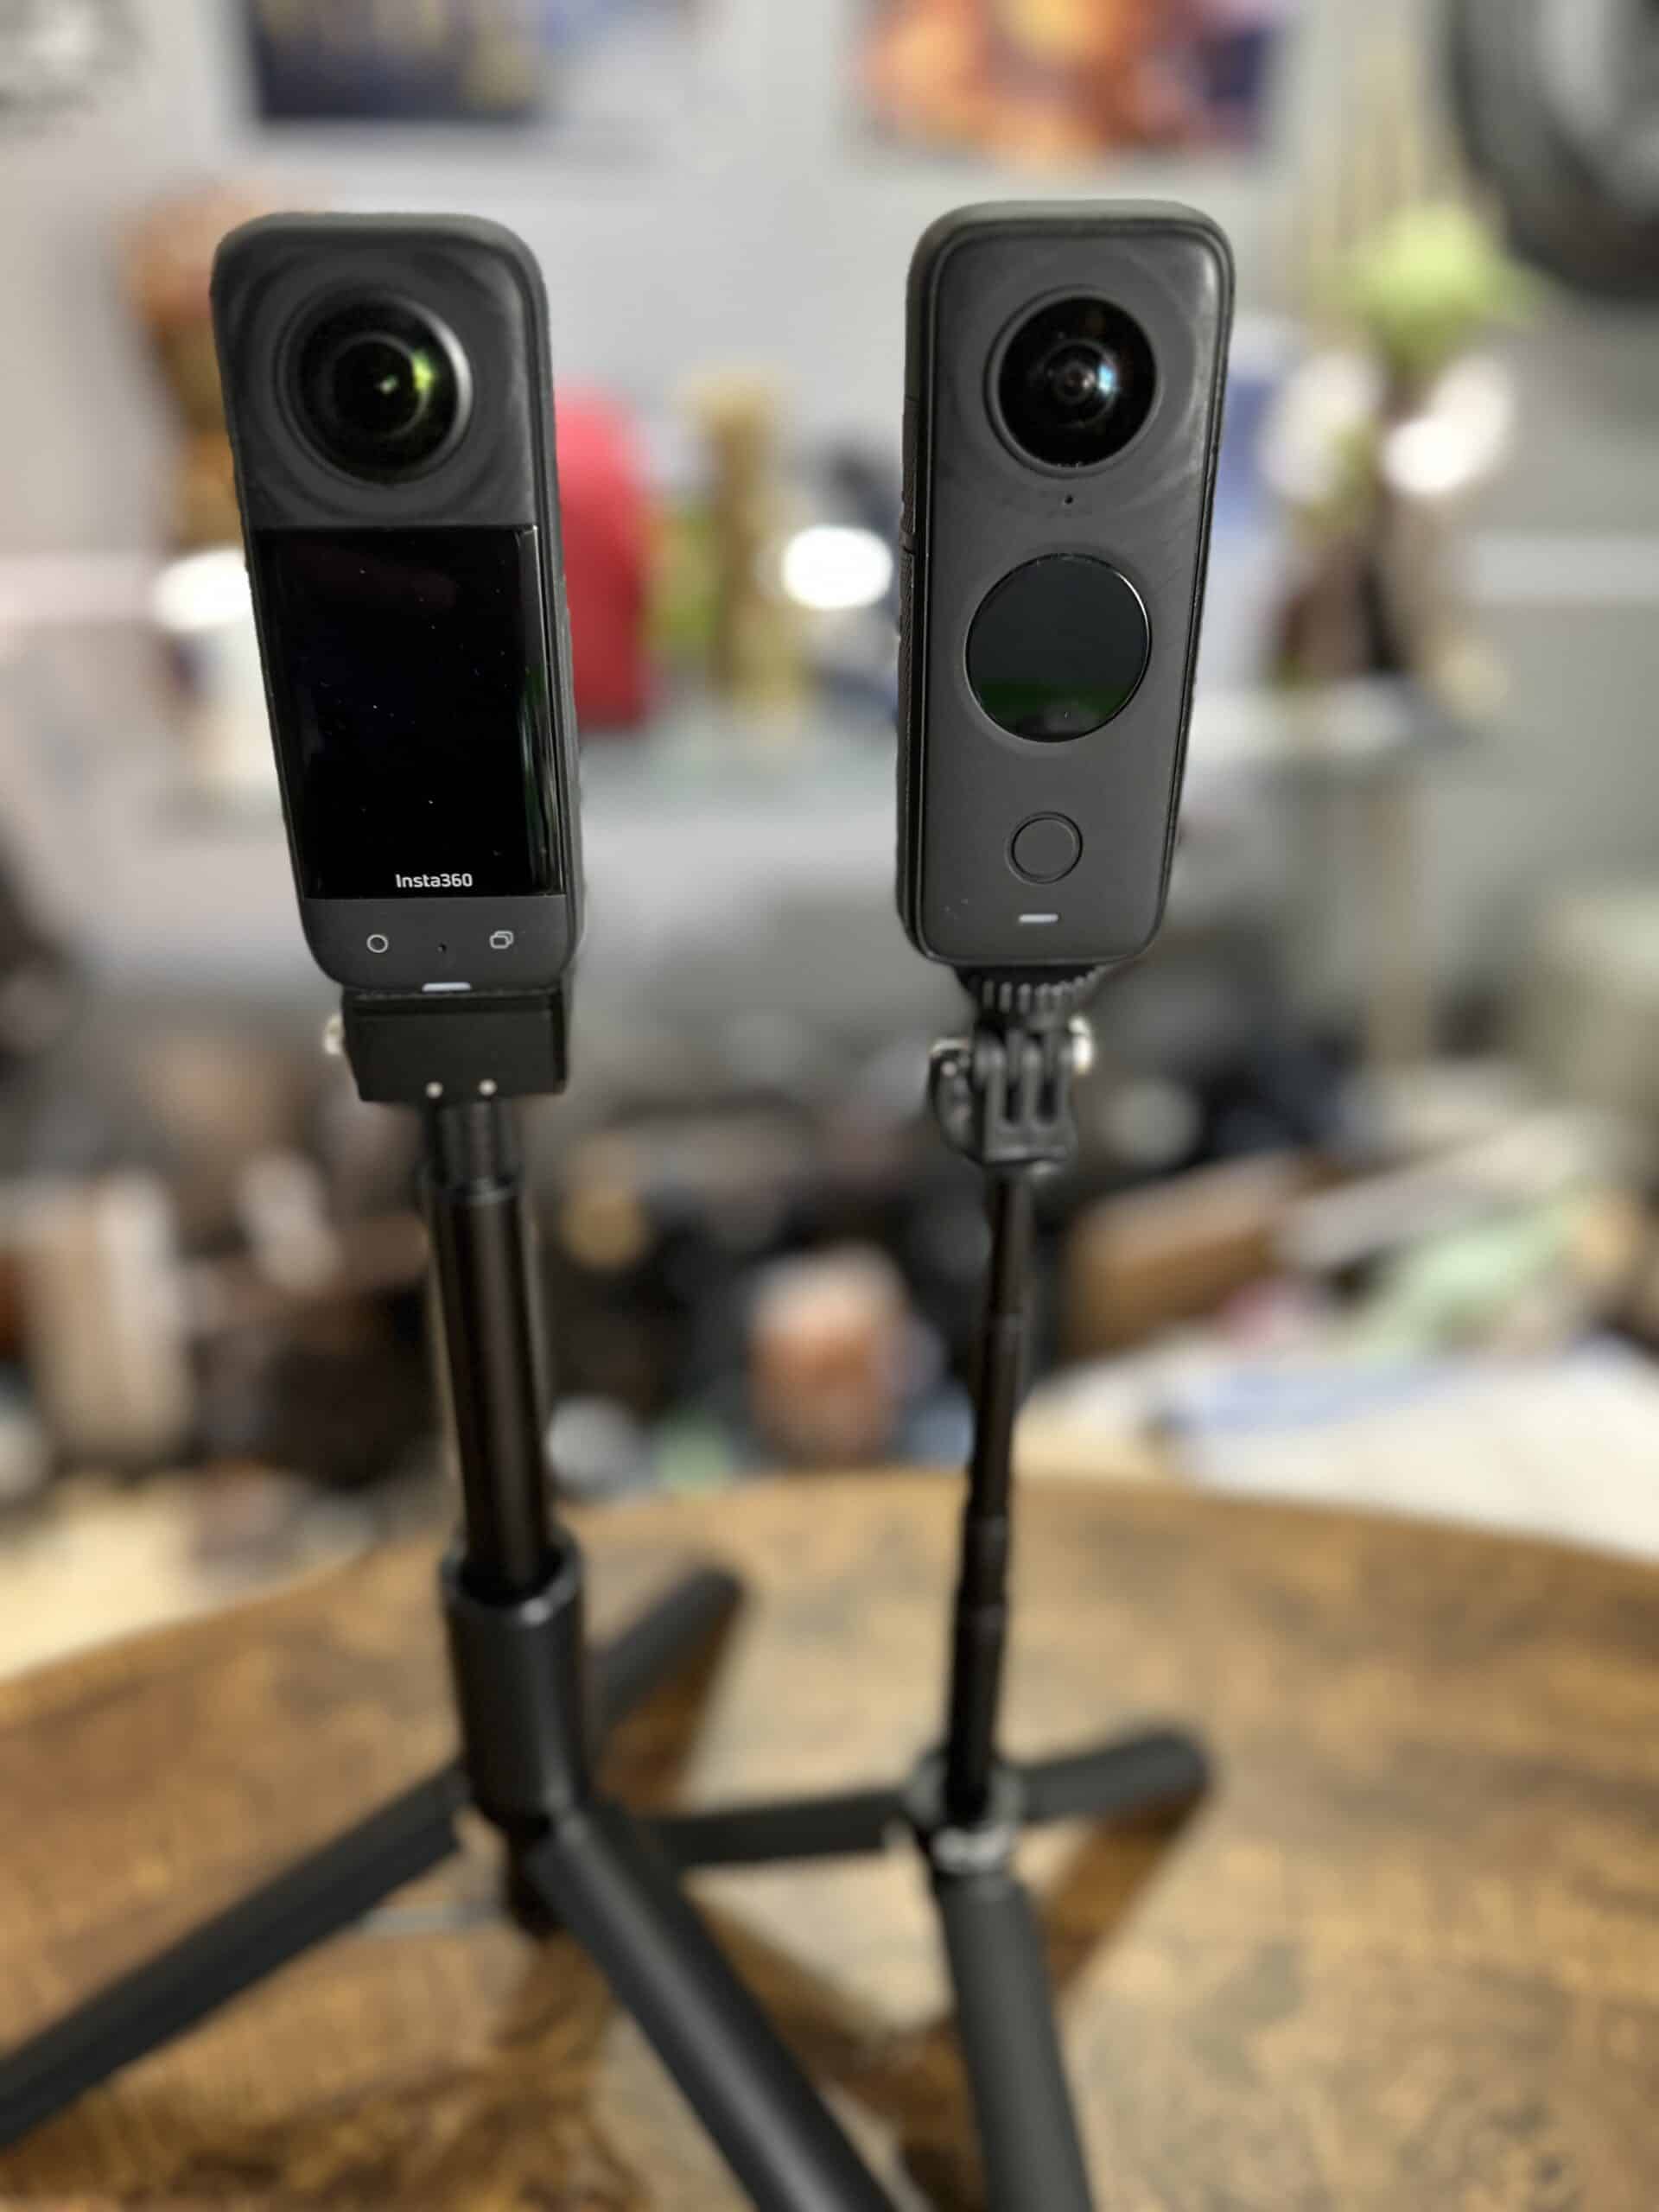 2 in 1 regular on left and mini on right. with insta 360 cameras. Which invisible selfie stick do you need?